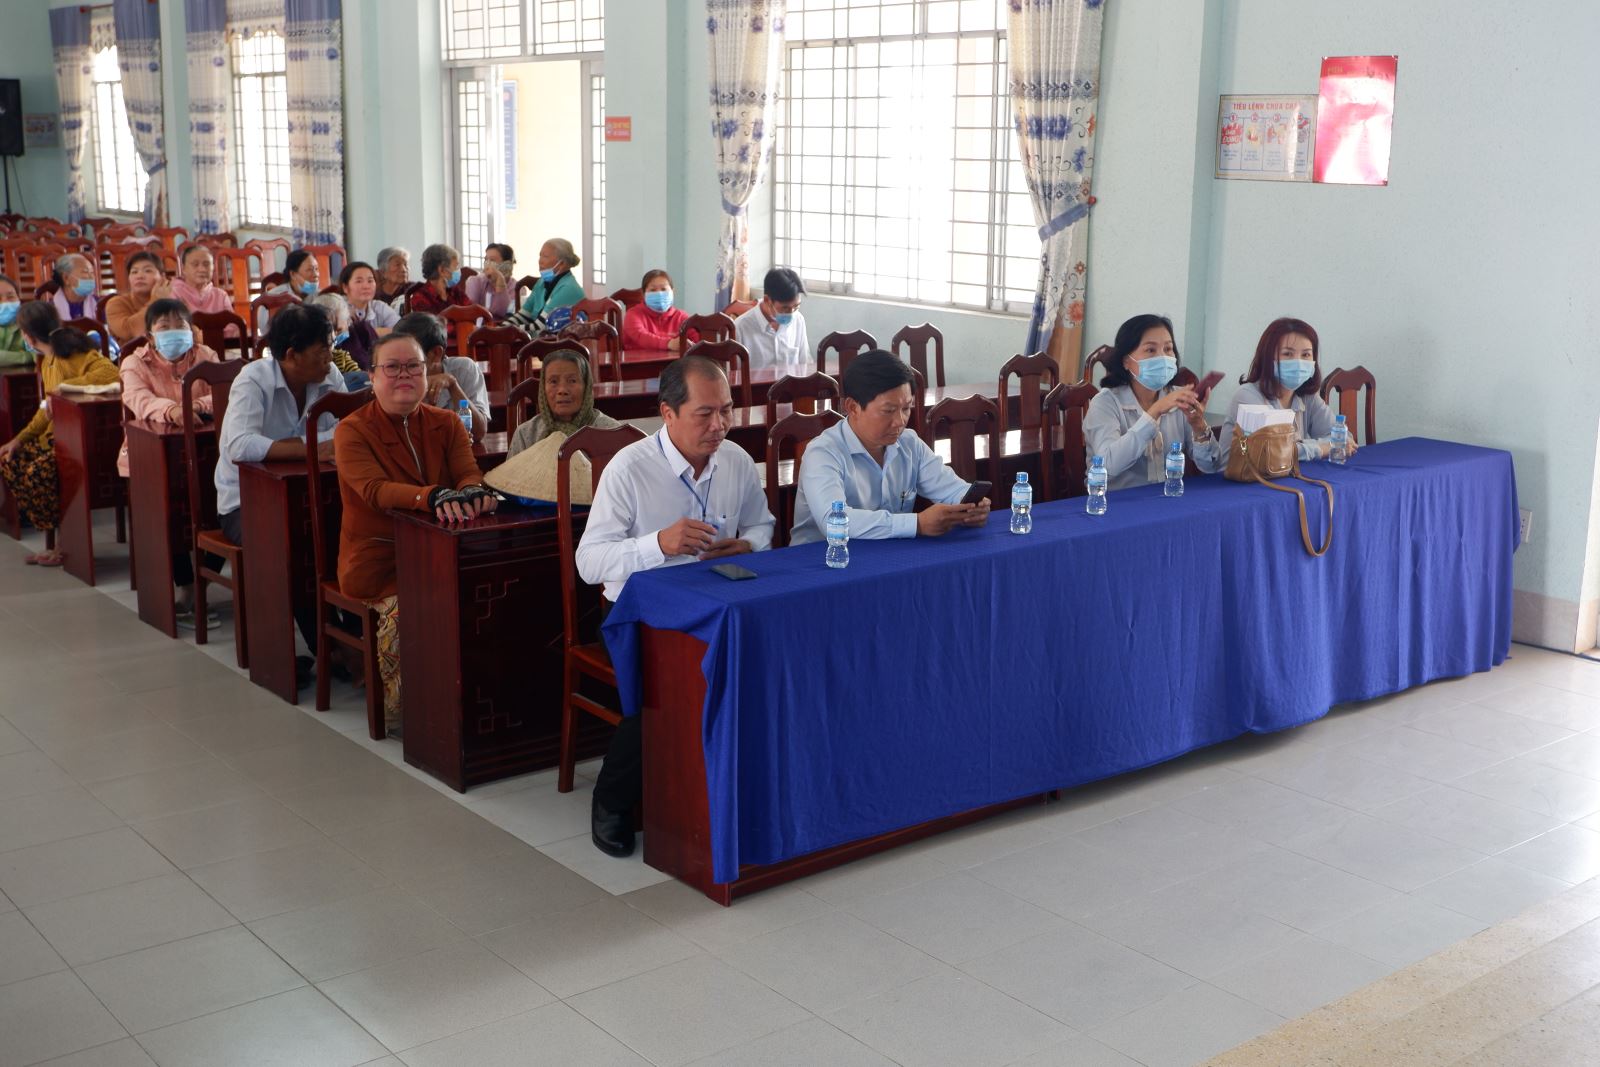 On 21/01/2021, Vinh Loc – Ben Luc Corporation supported 100 gifts and needles for poor households in 3 hamlets of Voi La, Long Binh, Phuoc Tinh, in Long Hiep Commune, Ben Luc, Long An.